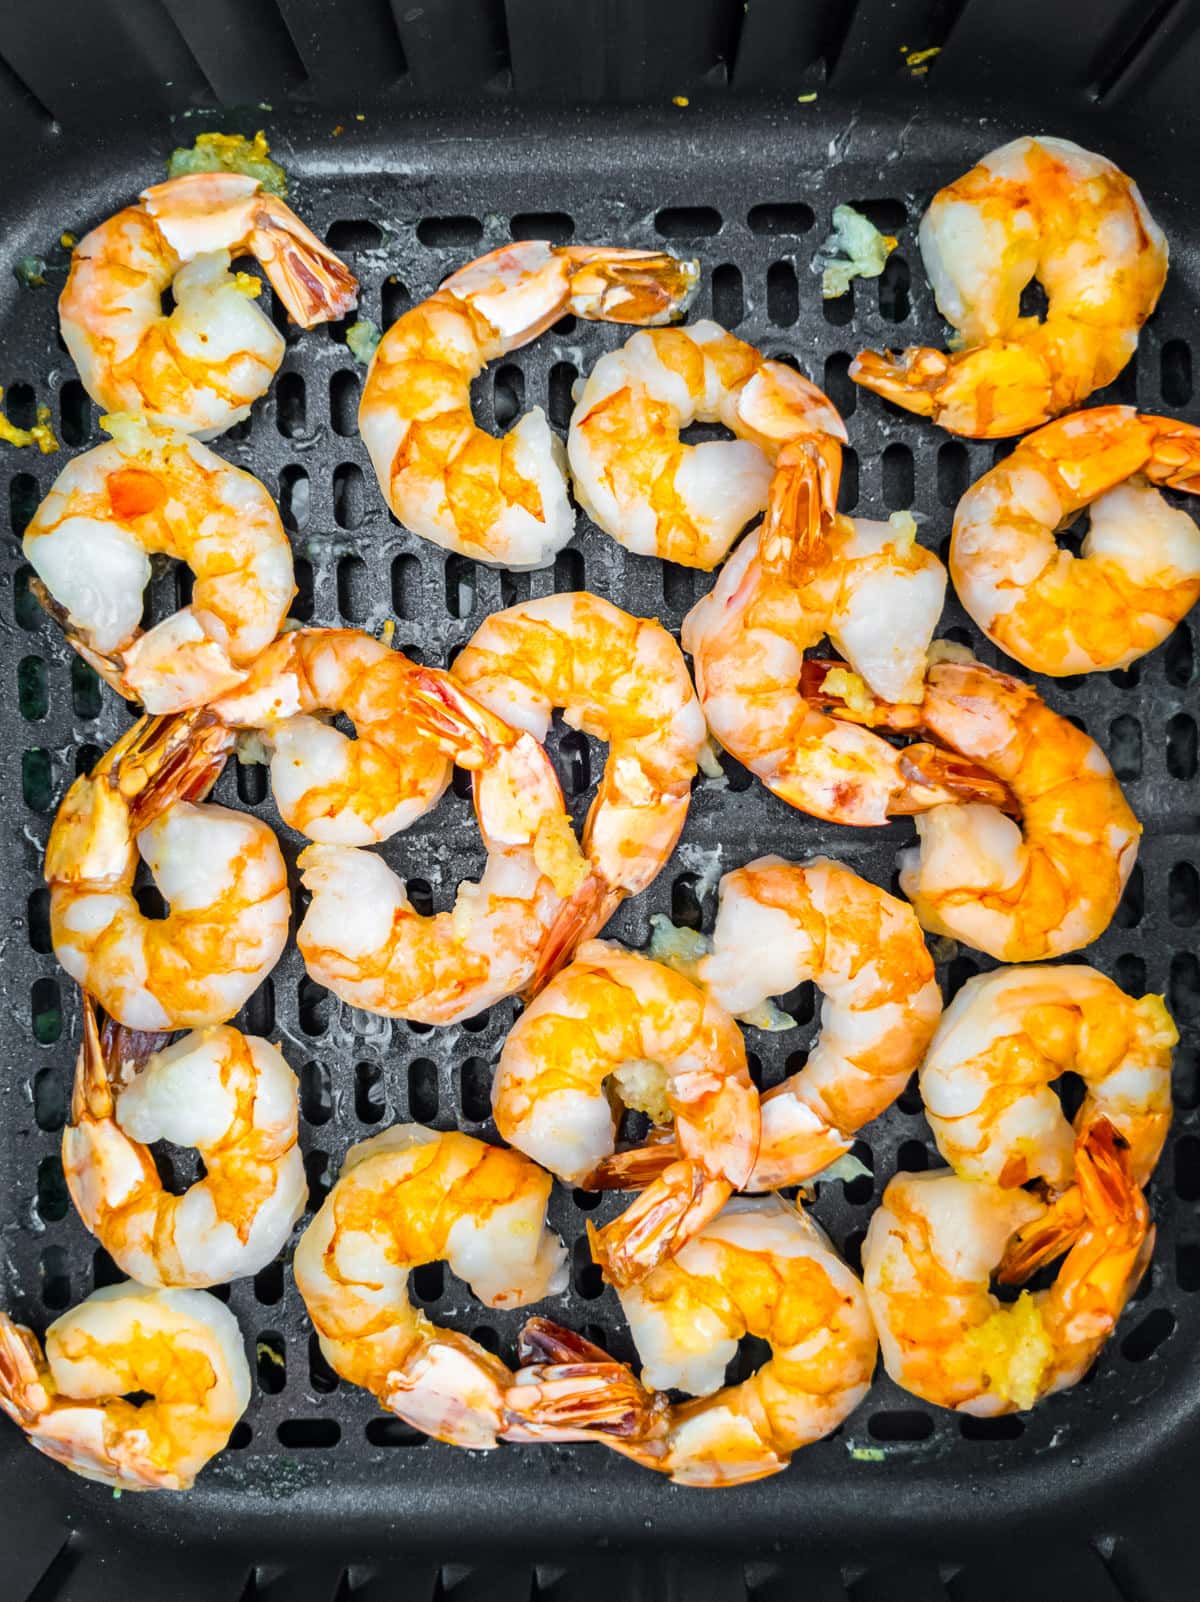 Cooked shrimps with butter and garlic in the air fryer basket.